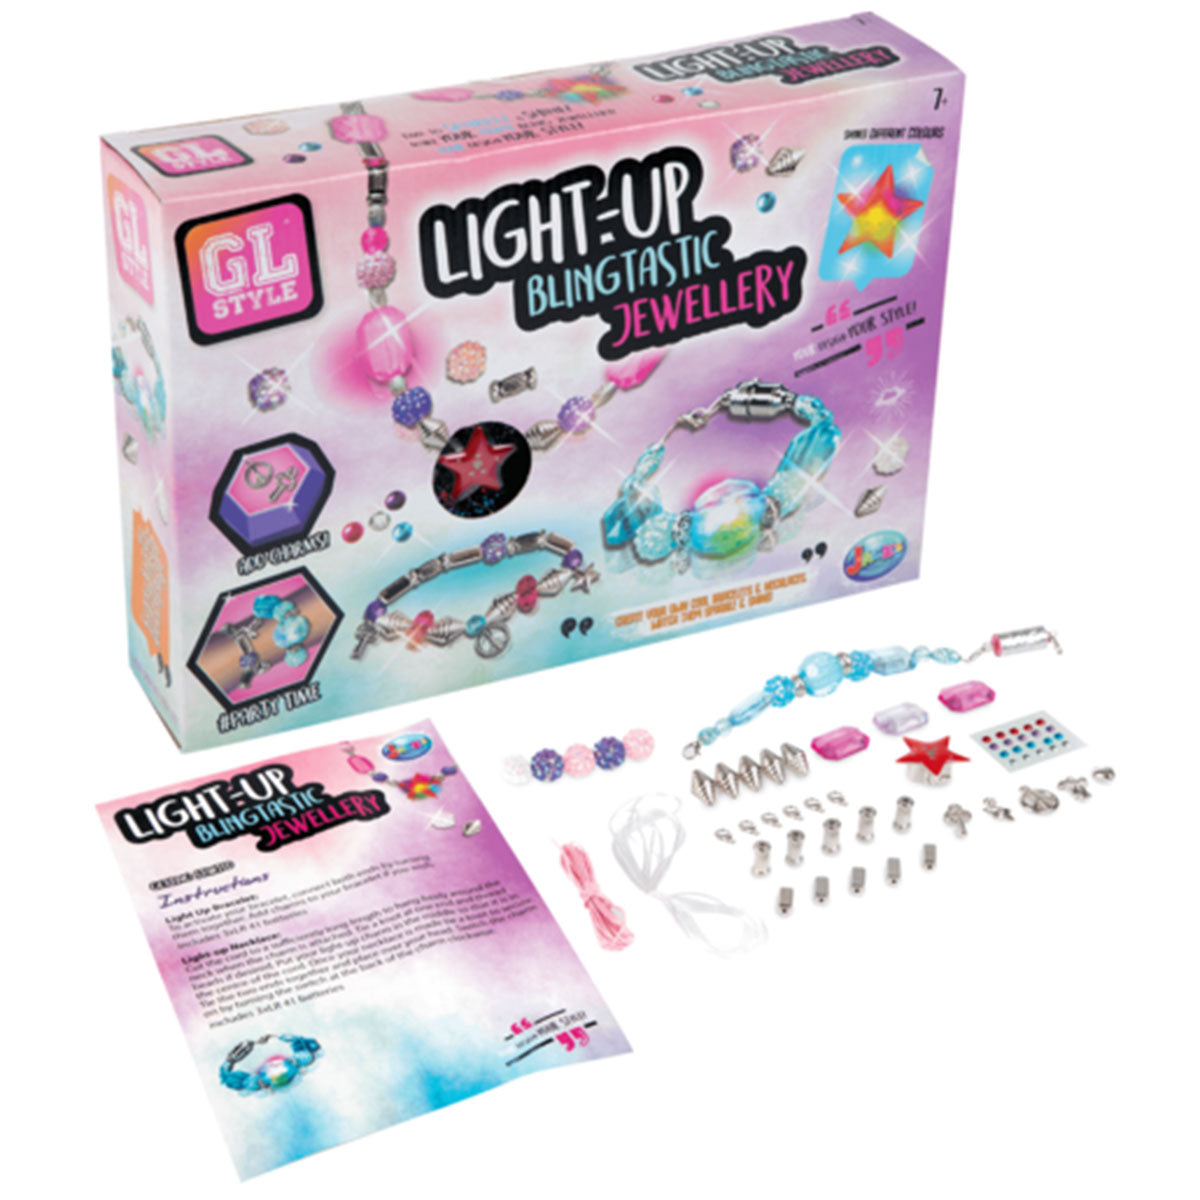 Make Your Own Light Up Blingtastic Jewellery